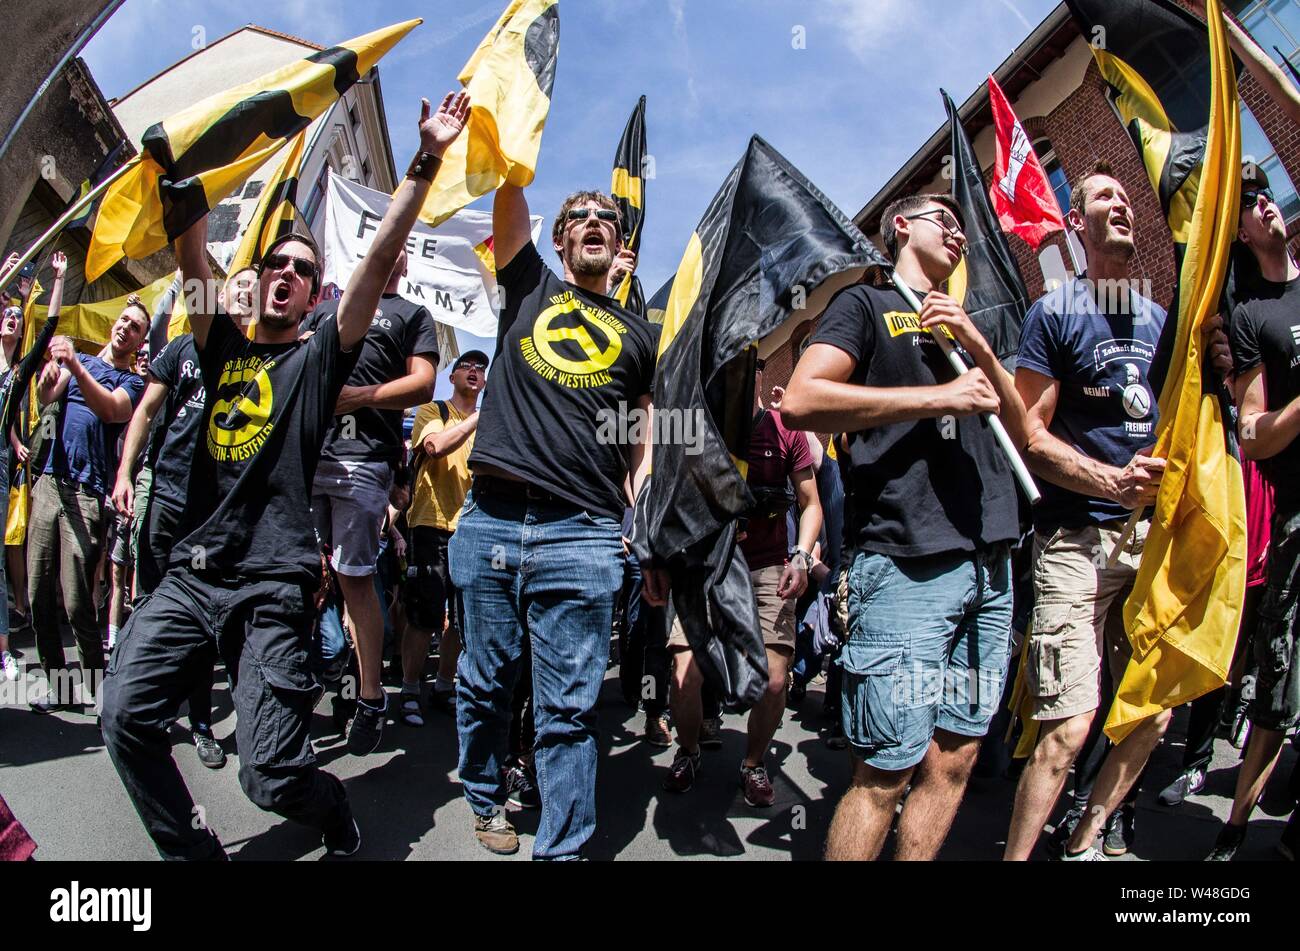 Halle, Germany. 20th July, 2019. Young right-extremists with the white supremacist Identitaere Bewegung (Generation Identity hold flags with the symbol of the group at a rally in Halle an der Saale, Germany. Credit: Sachelle Babbar/ZUMA Wire/Alamy Live News Stock Photo